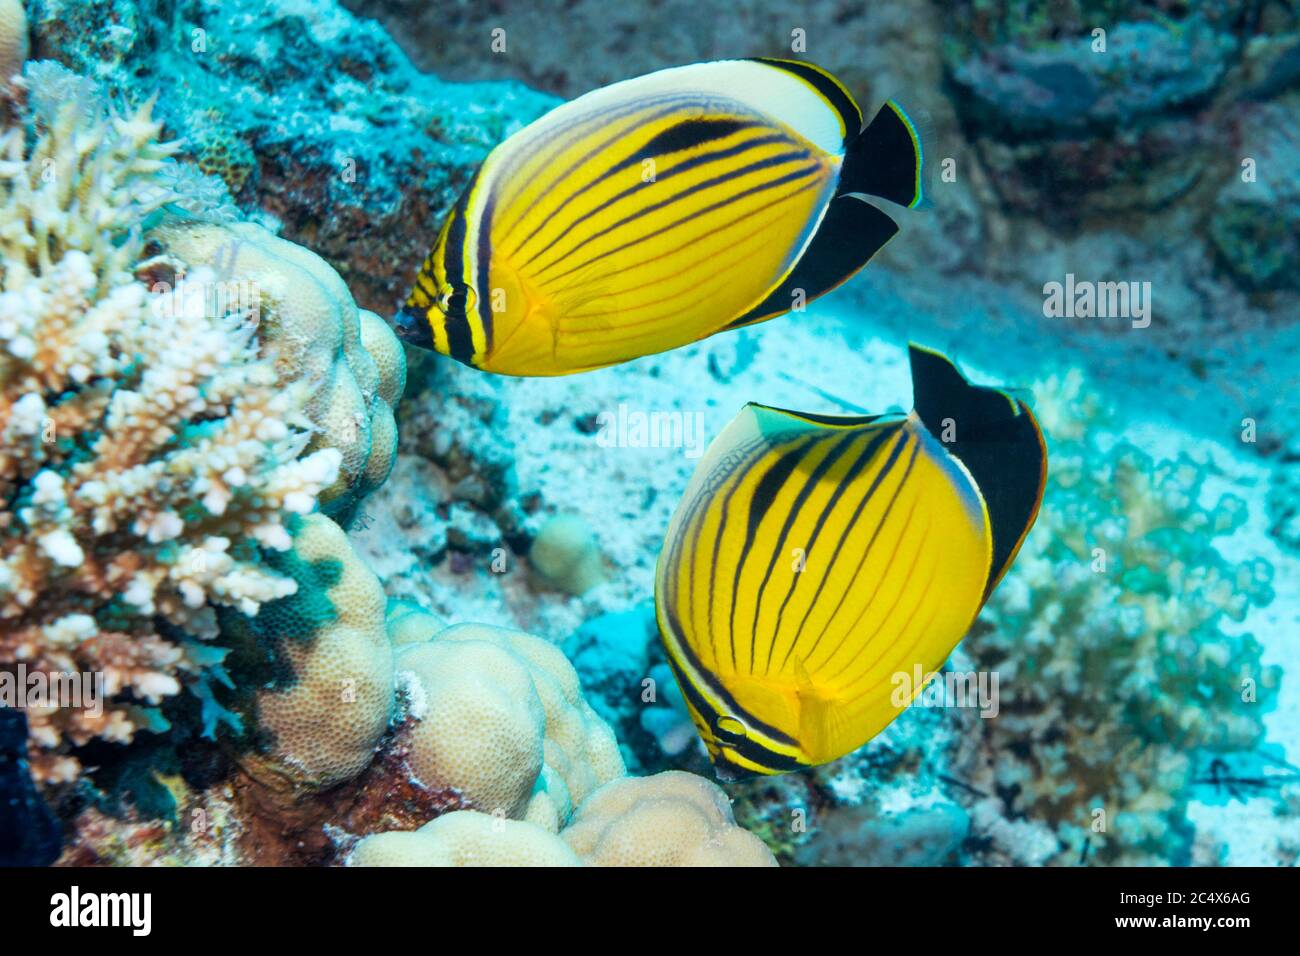 Pair of Exquisite or Blacktail butterflyfish (Chaetodon austriacus).  Egypt,  Red Sea. Stock Photo